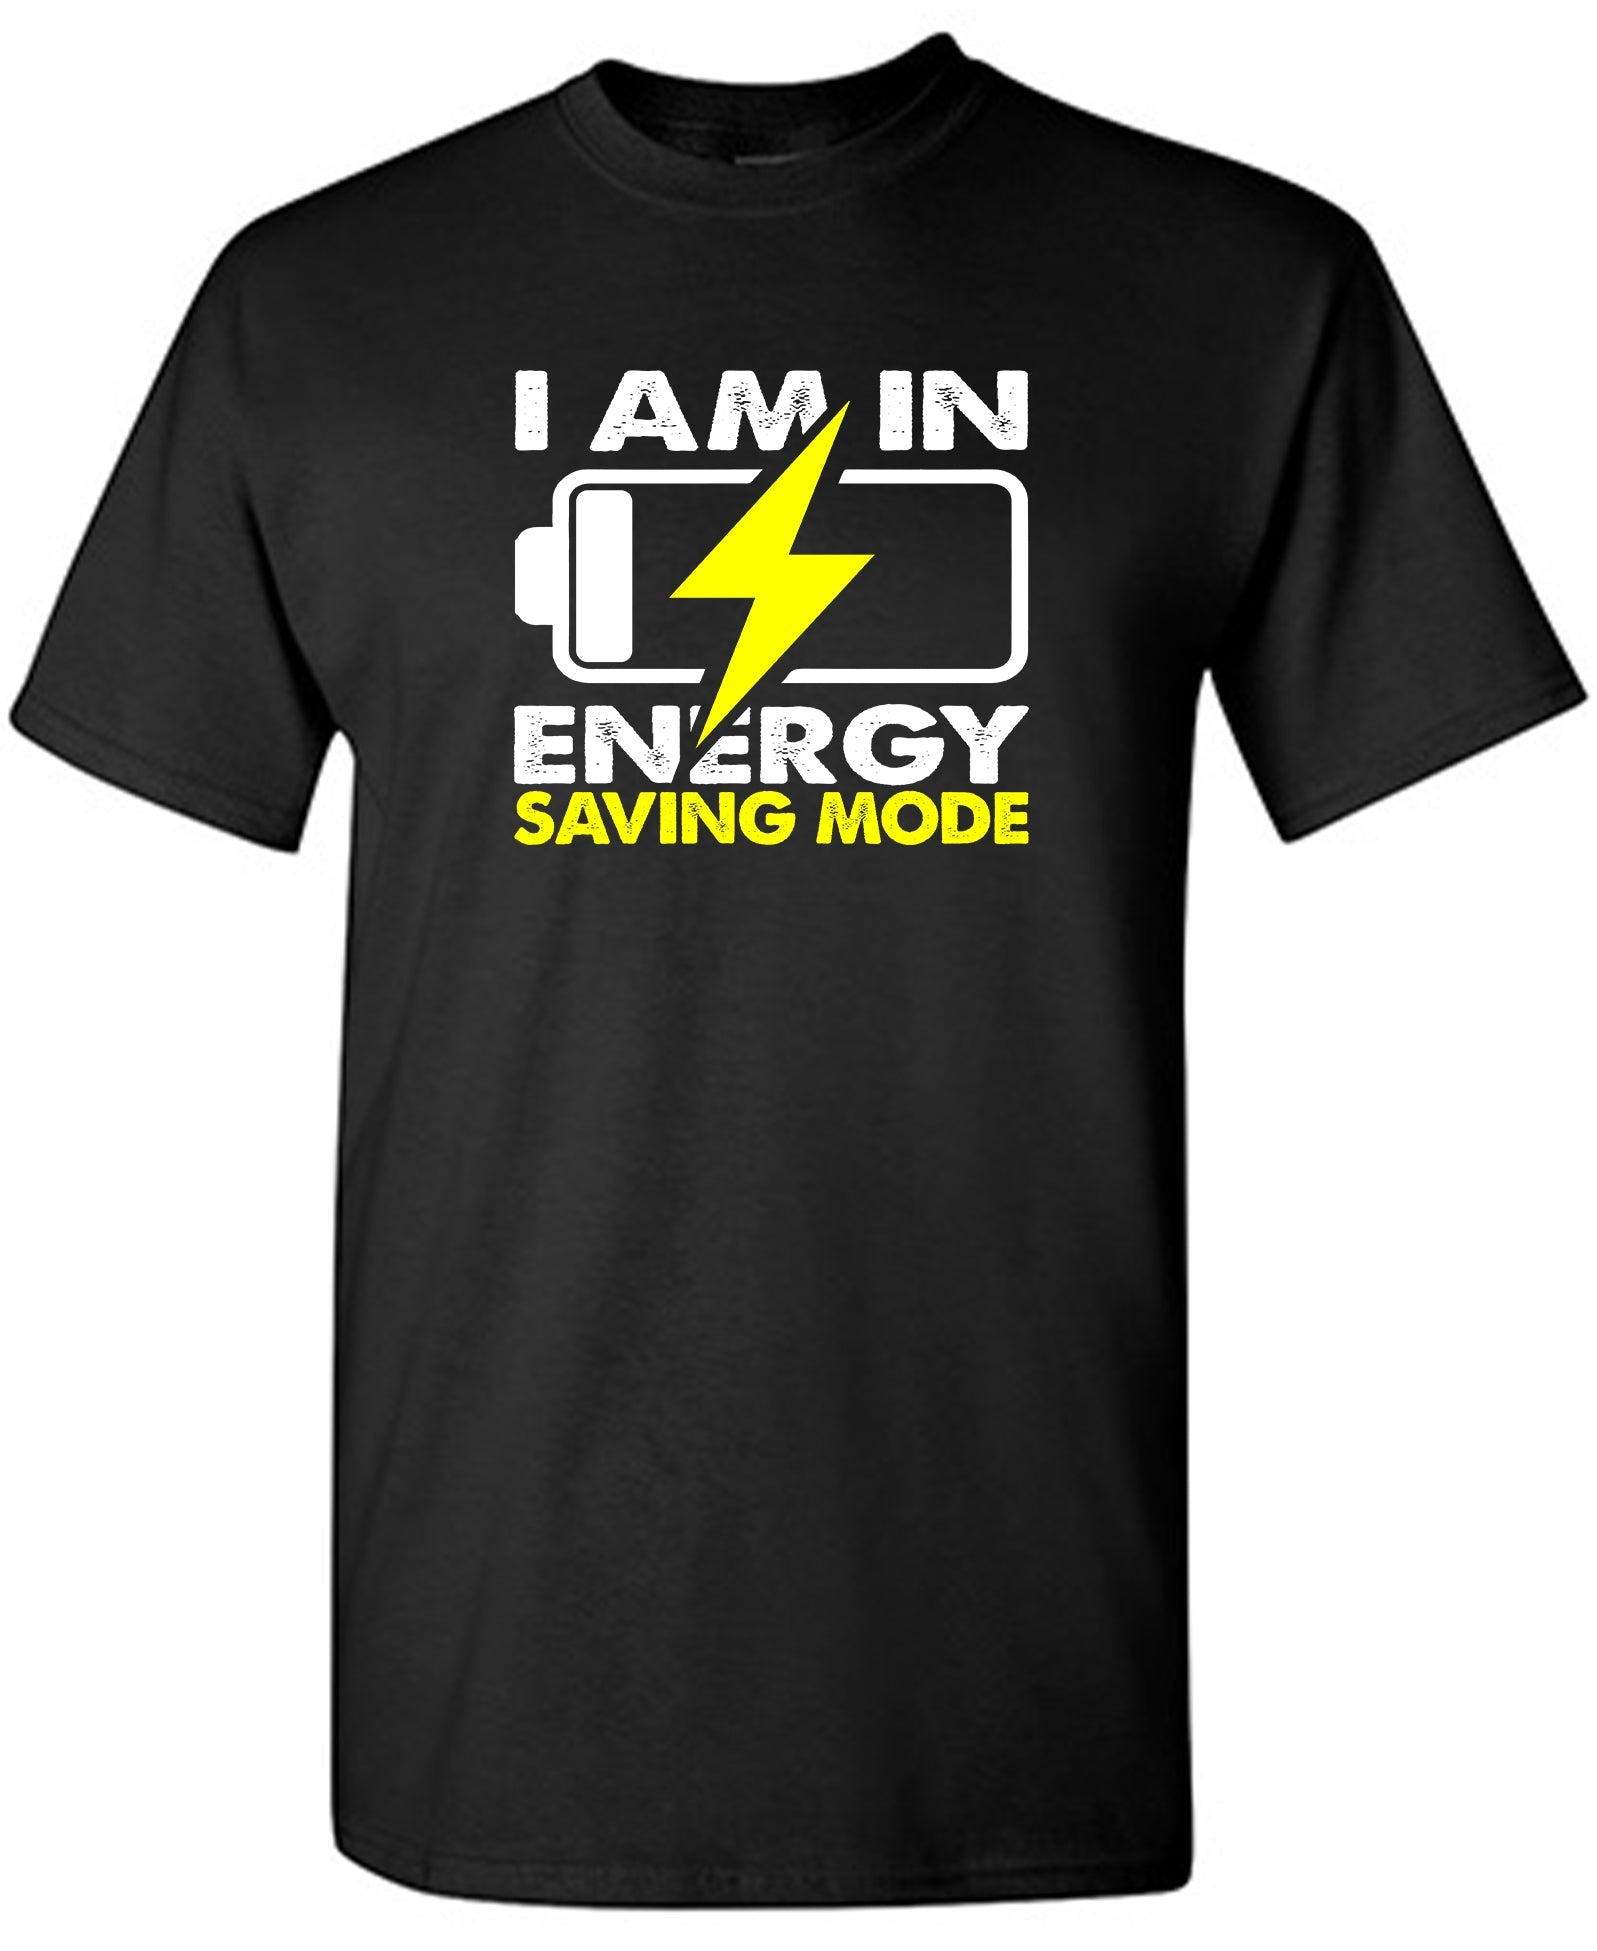 I am in Energy Saving Mode - Funny T Shirts & Graphic Tees